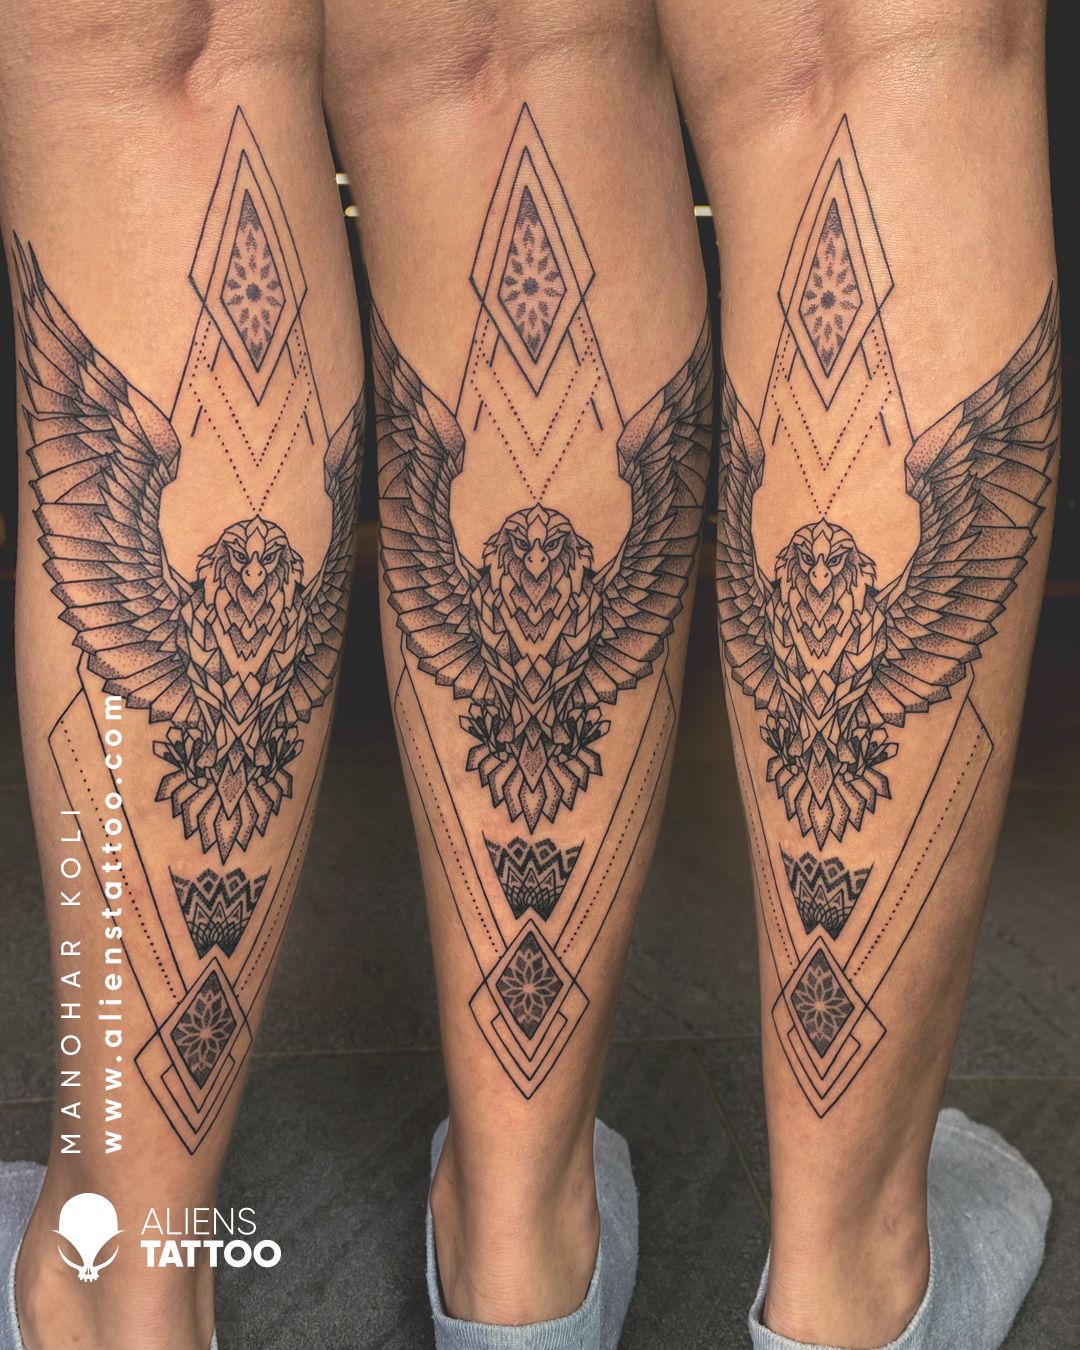 Tattoo uploaded by Aliens Tattoo • #Throwback to this amazing ...